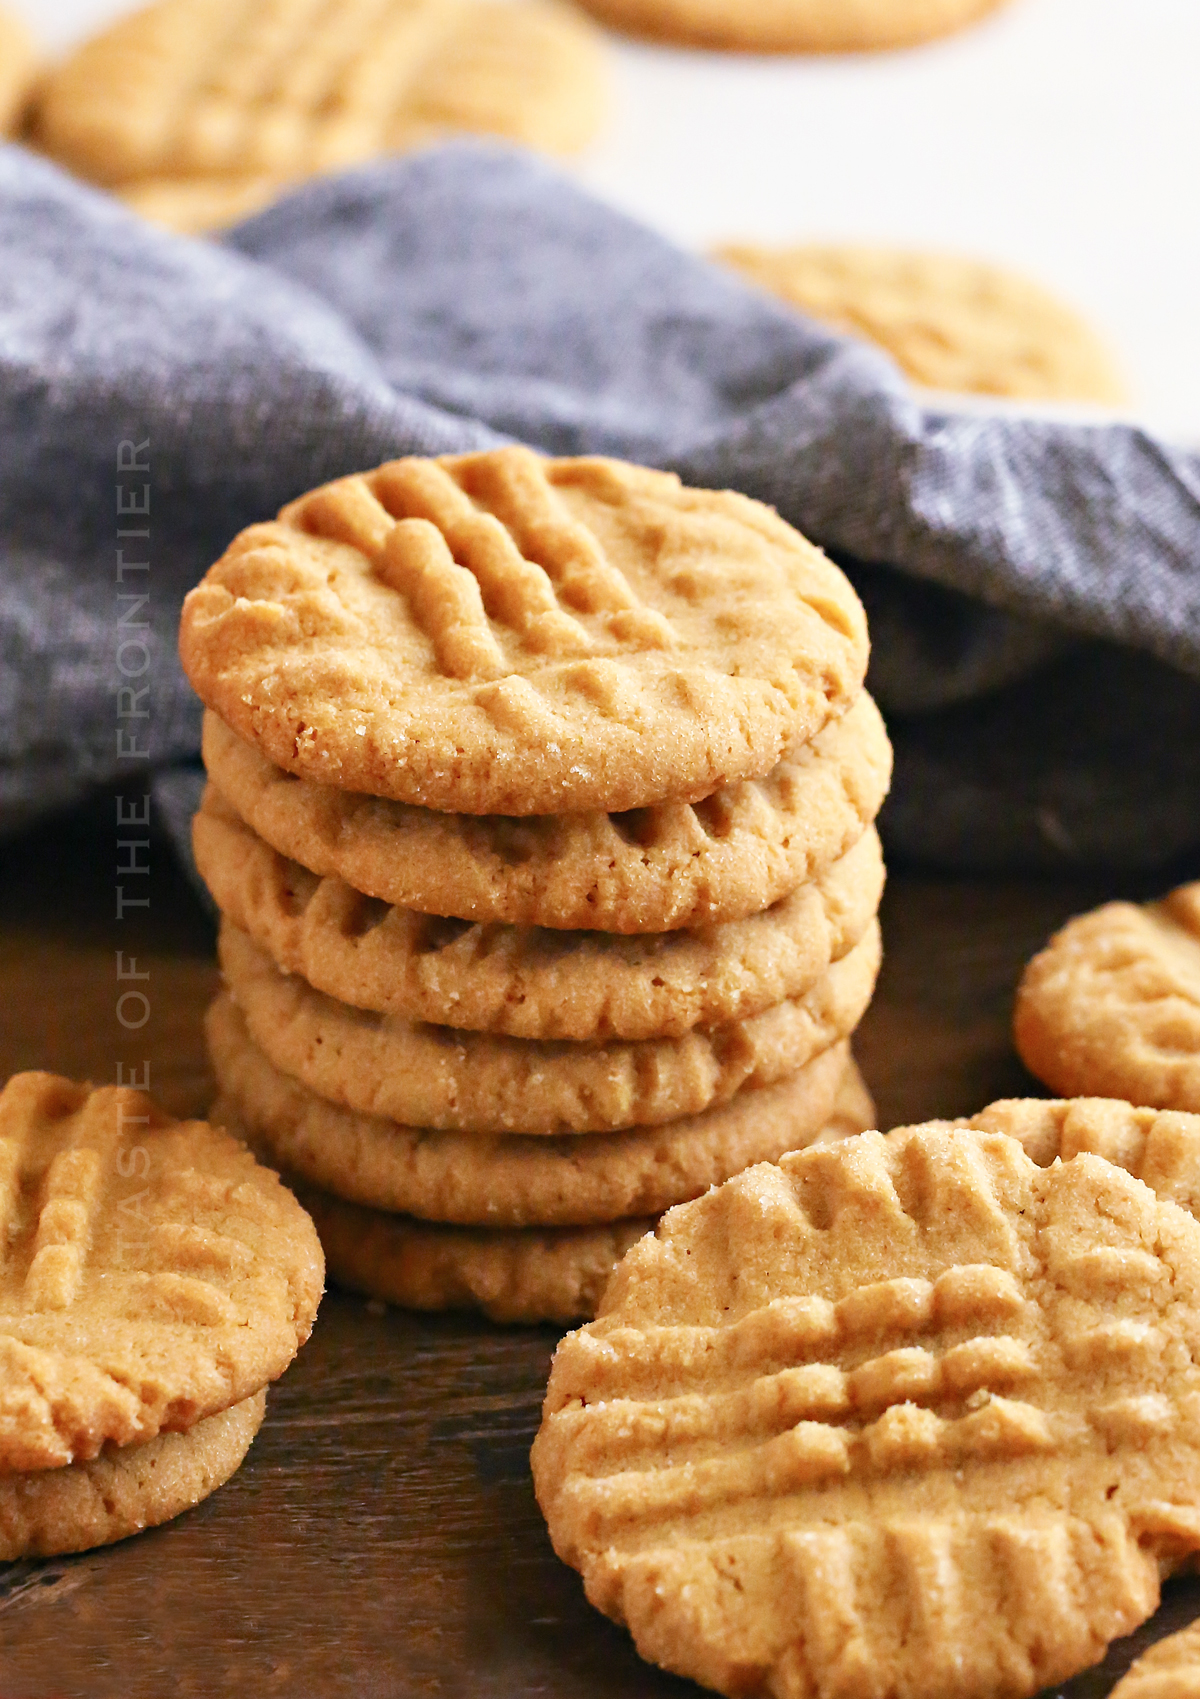 recipe for Peanut Butter Cookies